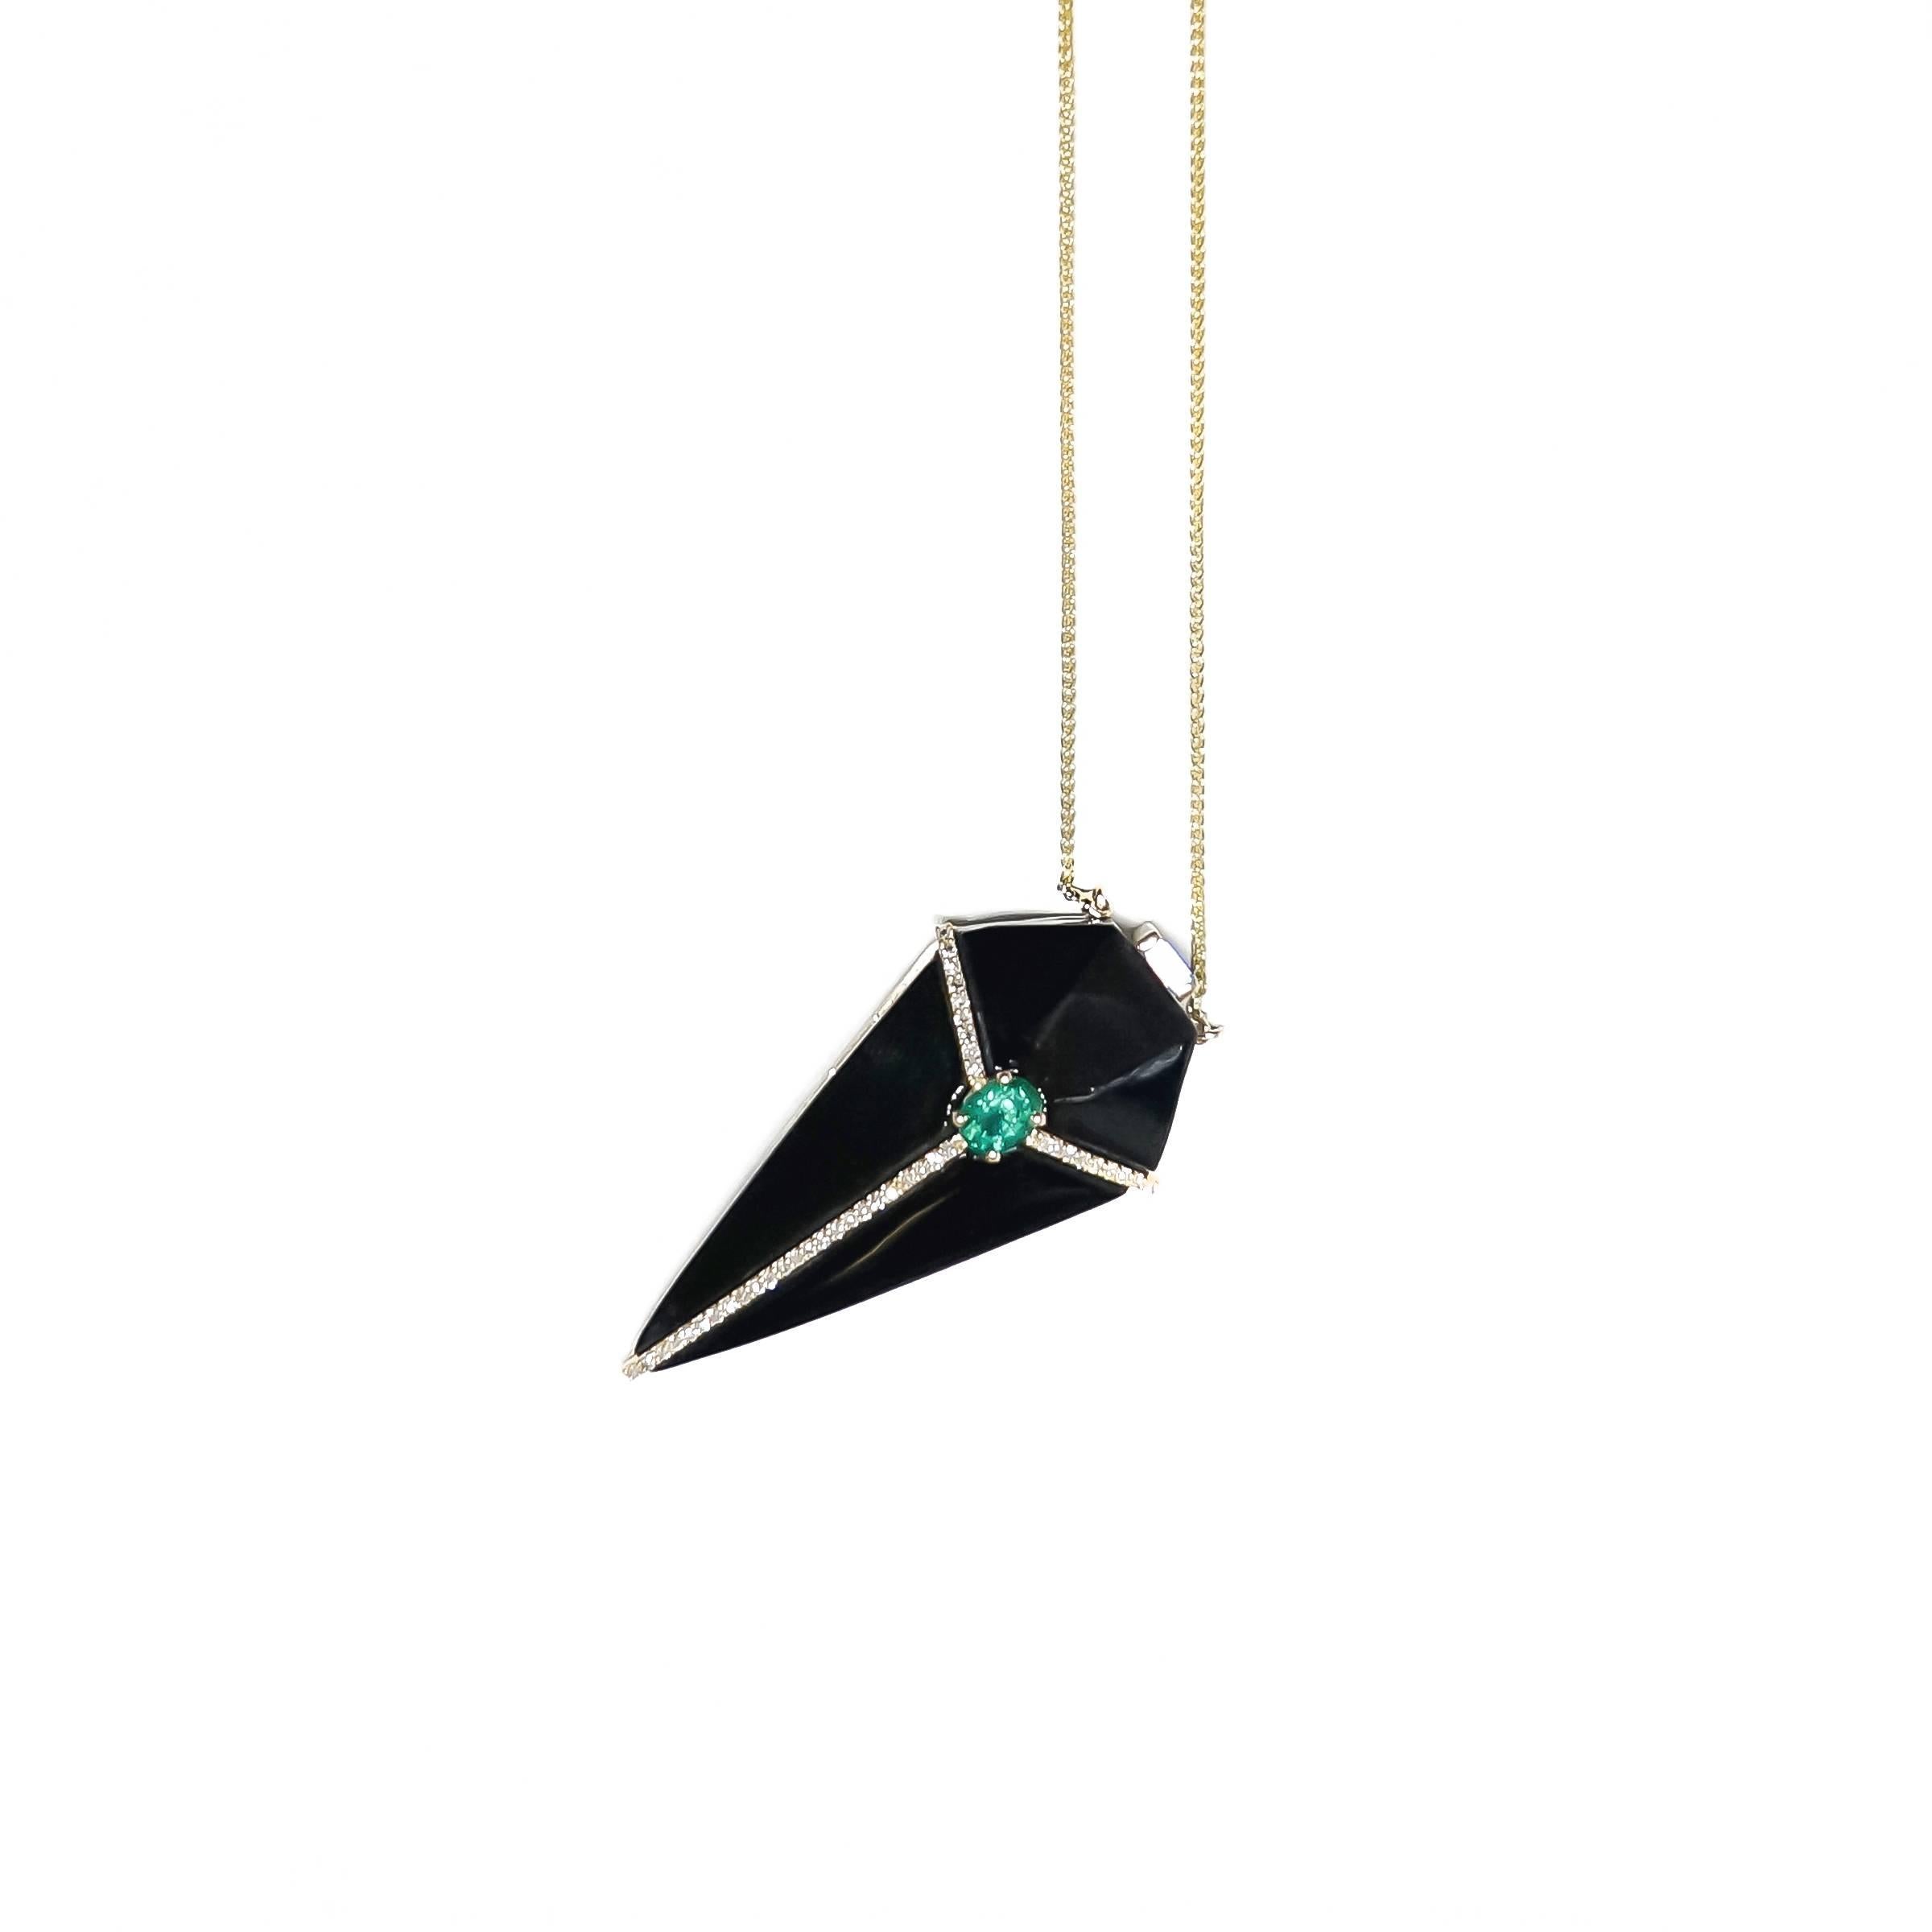 A captivating design, Ri Noor's Cubist Onyx Pendant Necklace with Diamonds and Emeralds boldly features glossy black geometric forms created of carved onyx with 14k yellow gold accents. The stunning necklace feature unenhanced emeralds accented by